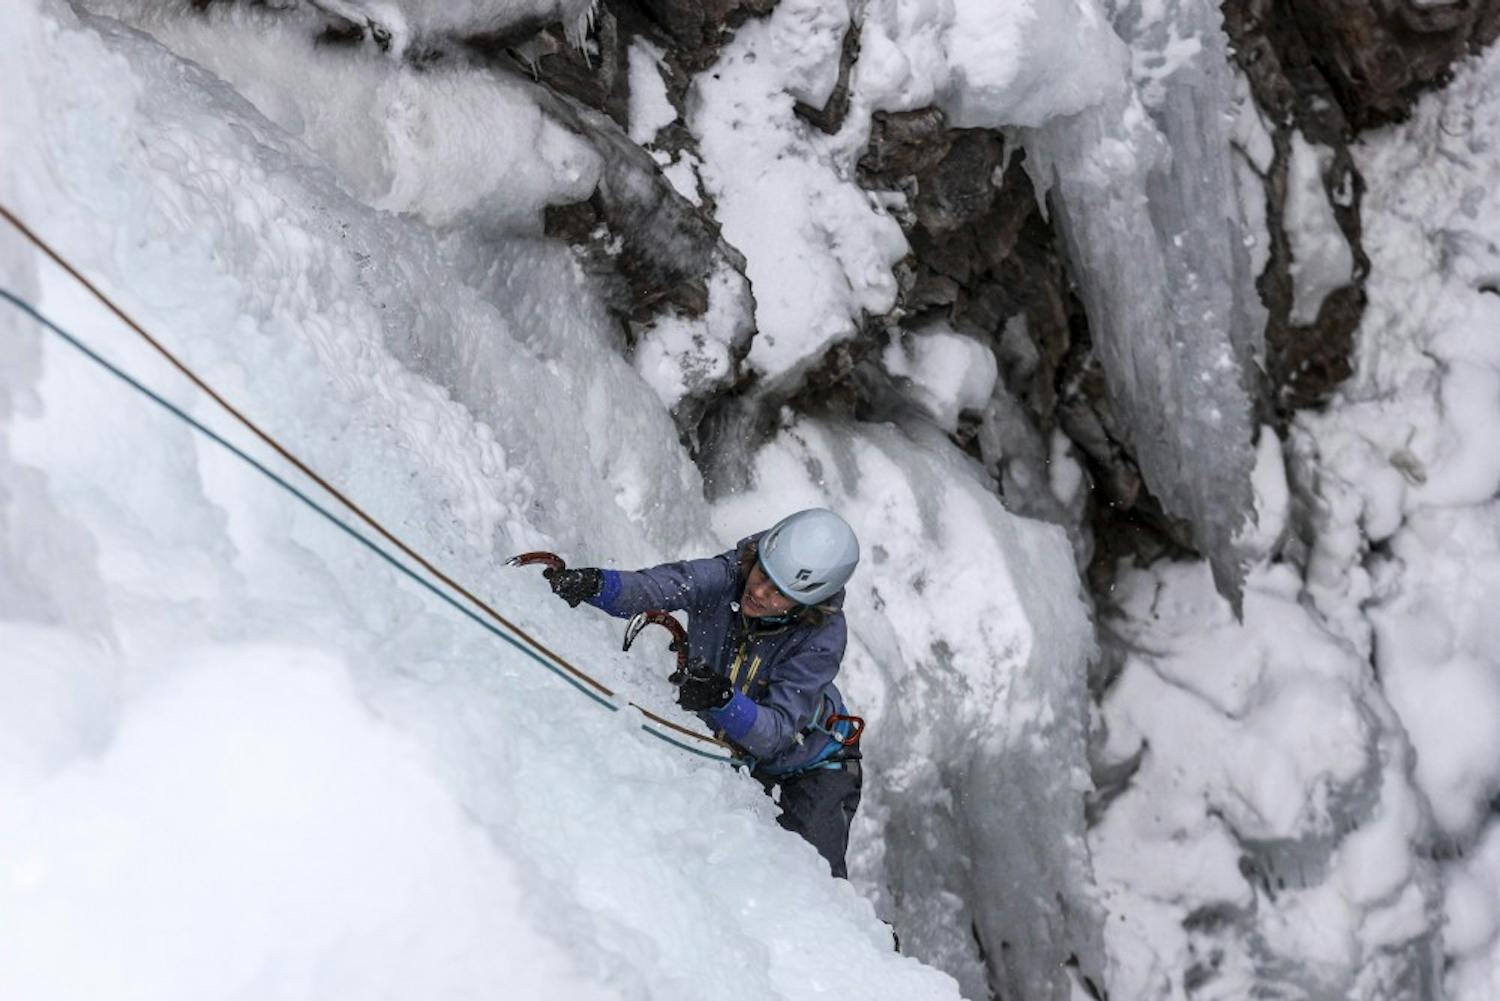 Every year Ouray Colorado, popularly known as the Switzerland of America, holds the world’s largest gathering of ice climbers. This year’s 2018 Ouray Ice Festival was held from Jan. 18 through 21.